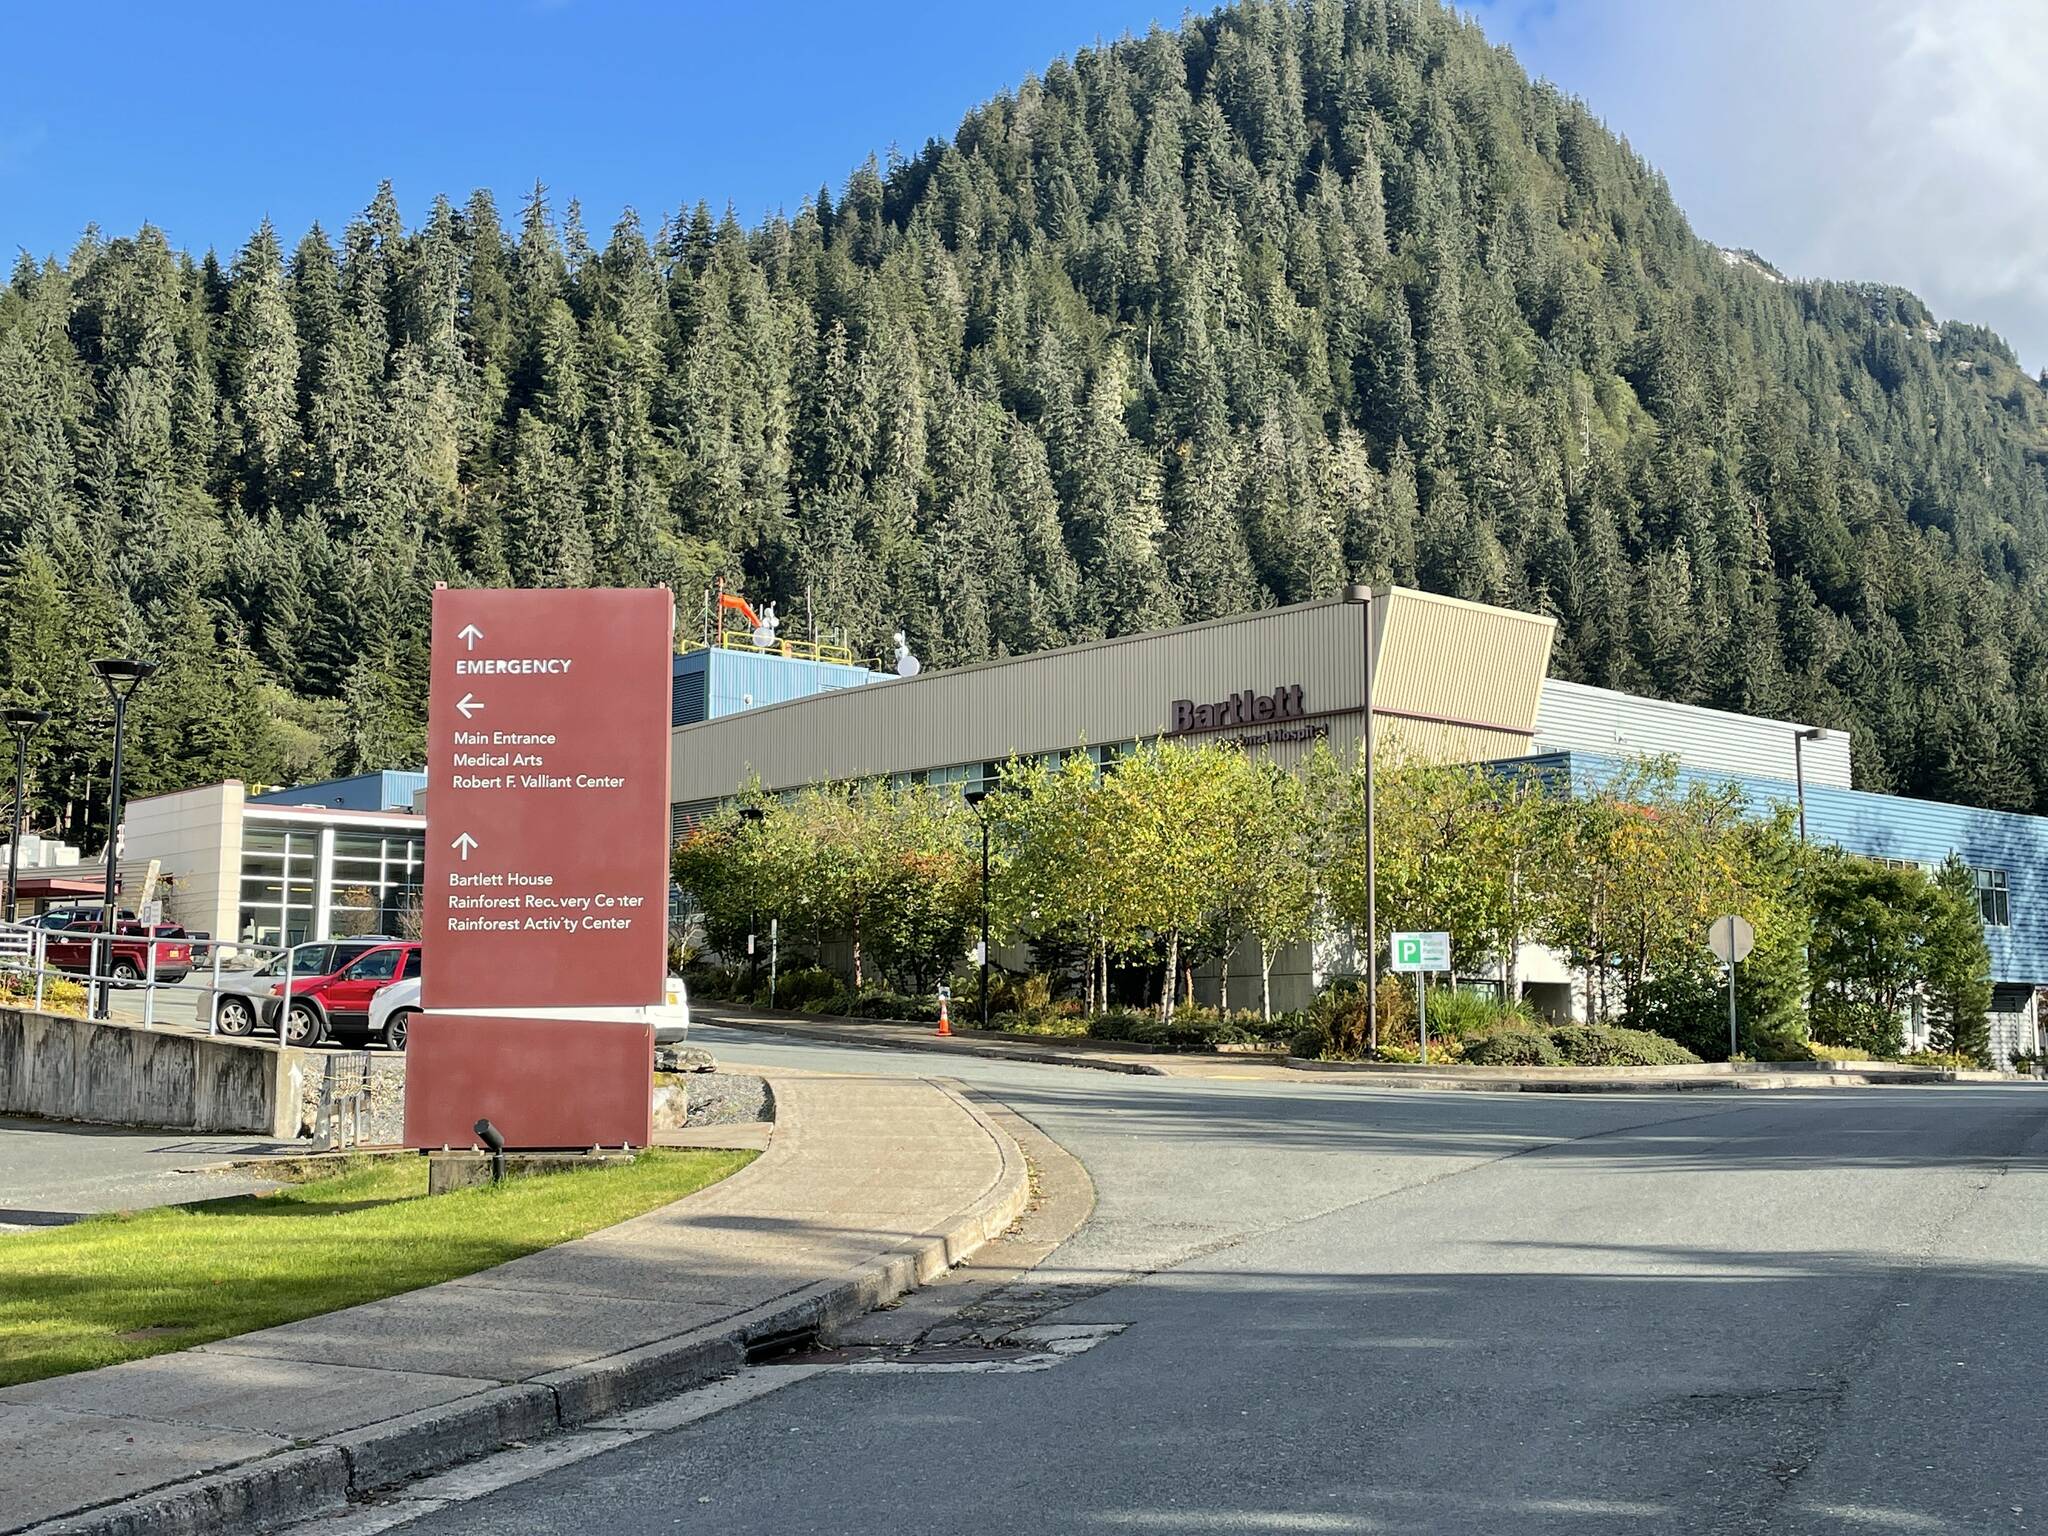 Bartlett Regional Hospital on Oct. 4. Jerel Humphrey will step into the top job at the hospital on Oct. 18. He’s the fourth Chief Executive Officer—and the third person to hold the position on an interim basis at the hospital this year. (Michael S. Lockett/Juneau Empire)